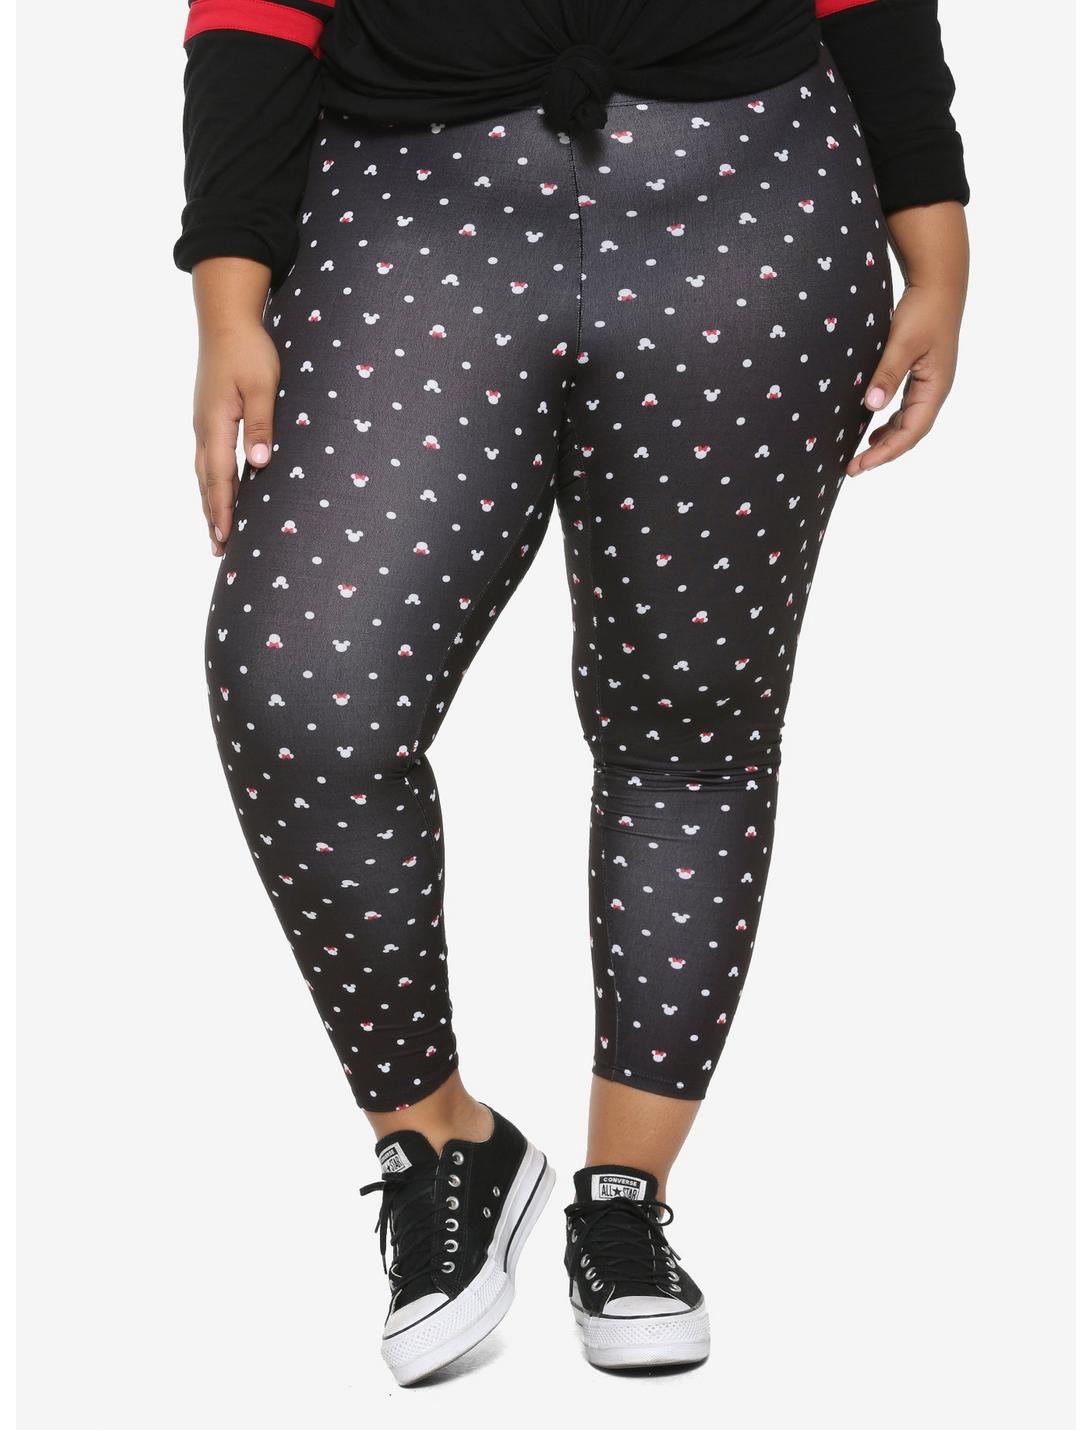 Her Universe Disney Mickey Mouse & Minnie Mouse Head Leggings Plus Size, BLACK, hi-res